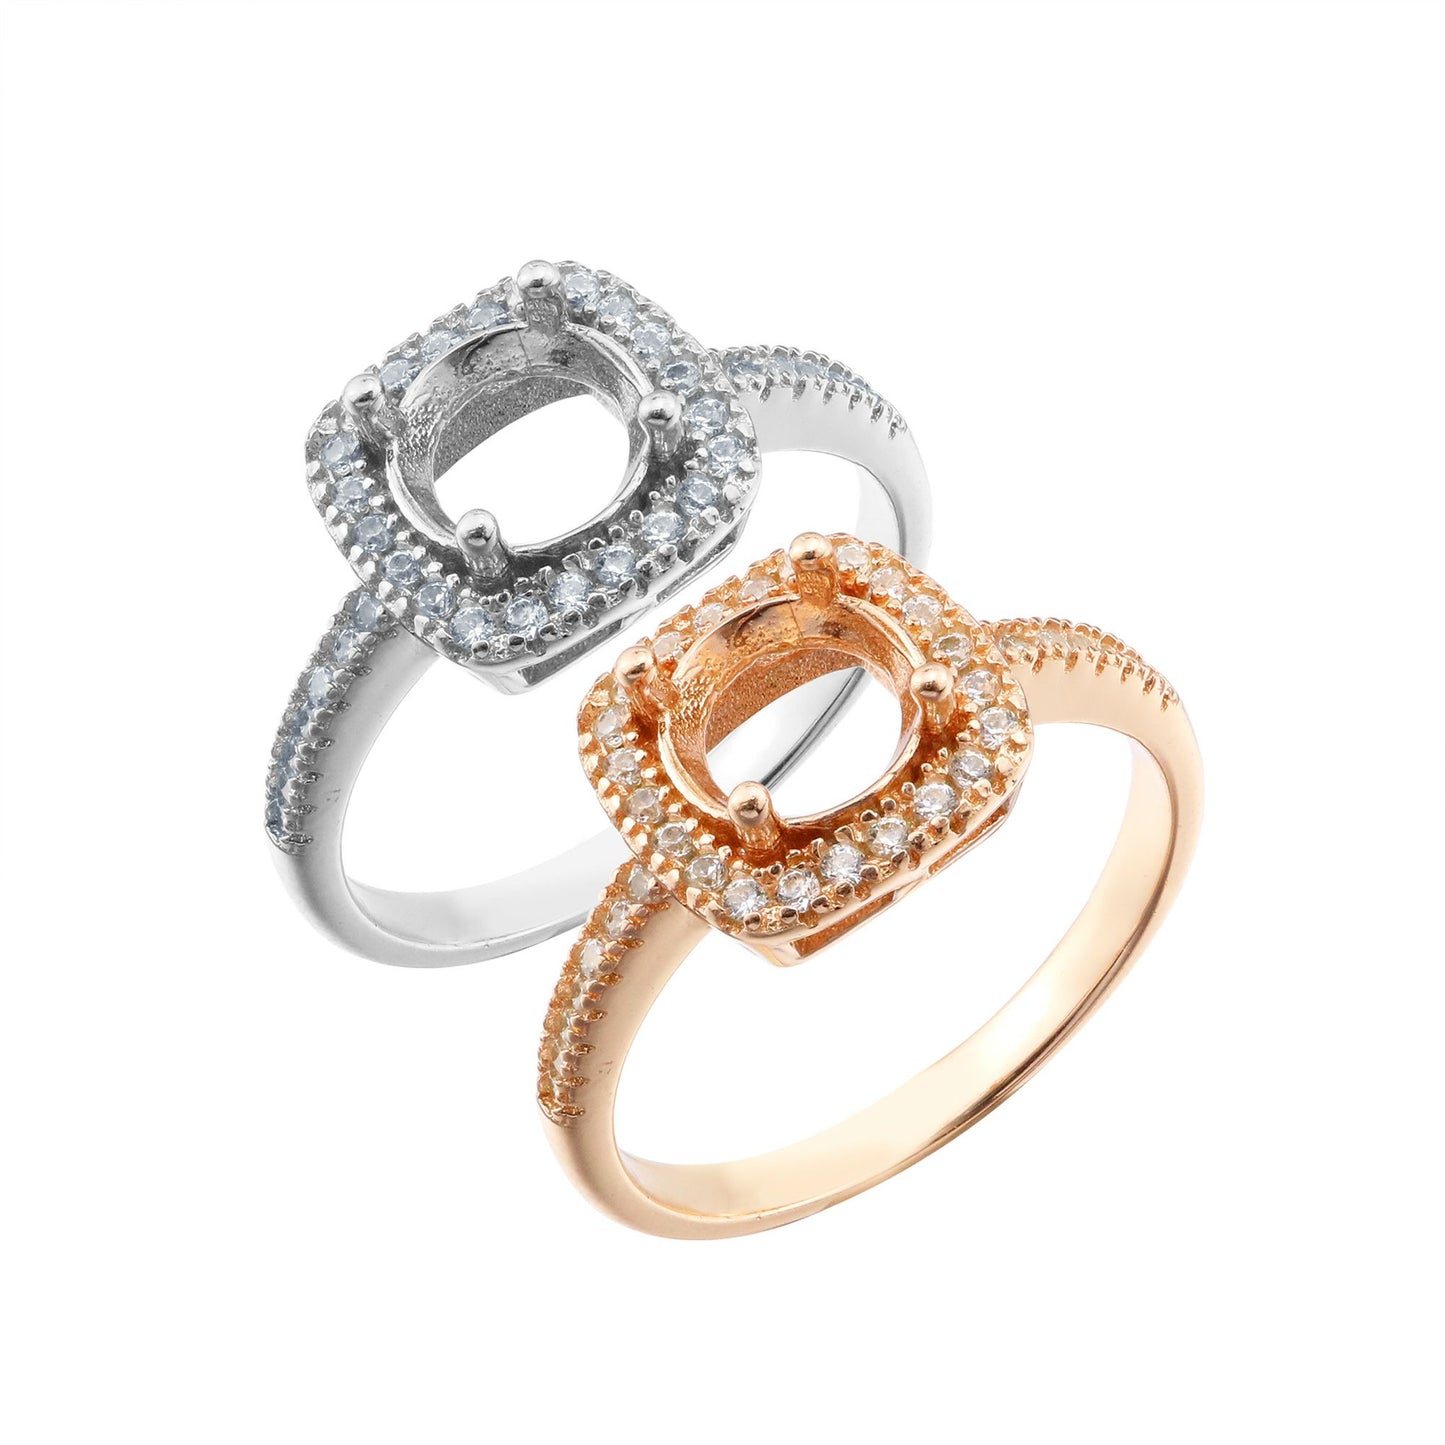 One silver and one rose gold semi mounts for a round gem with a slightly squared halo.